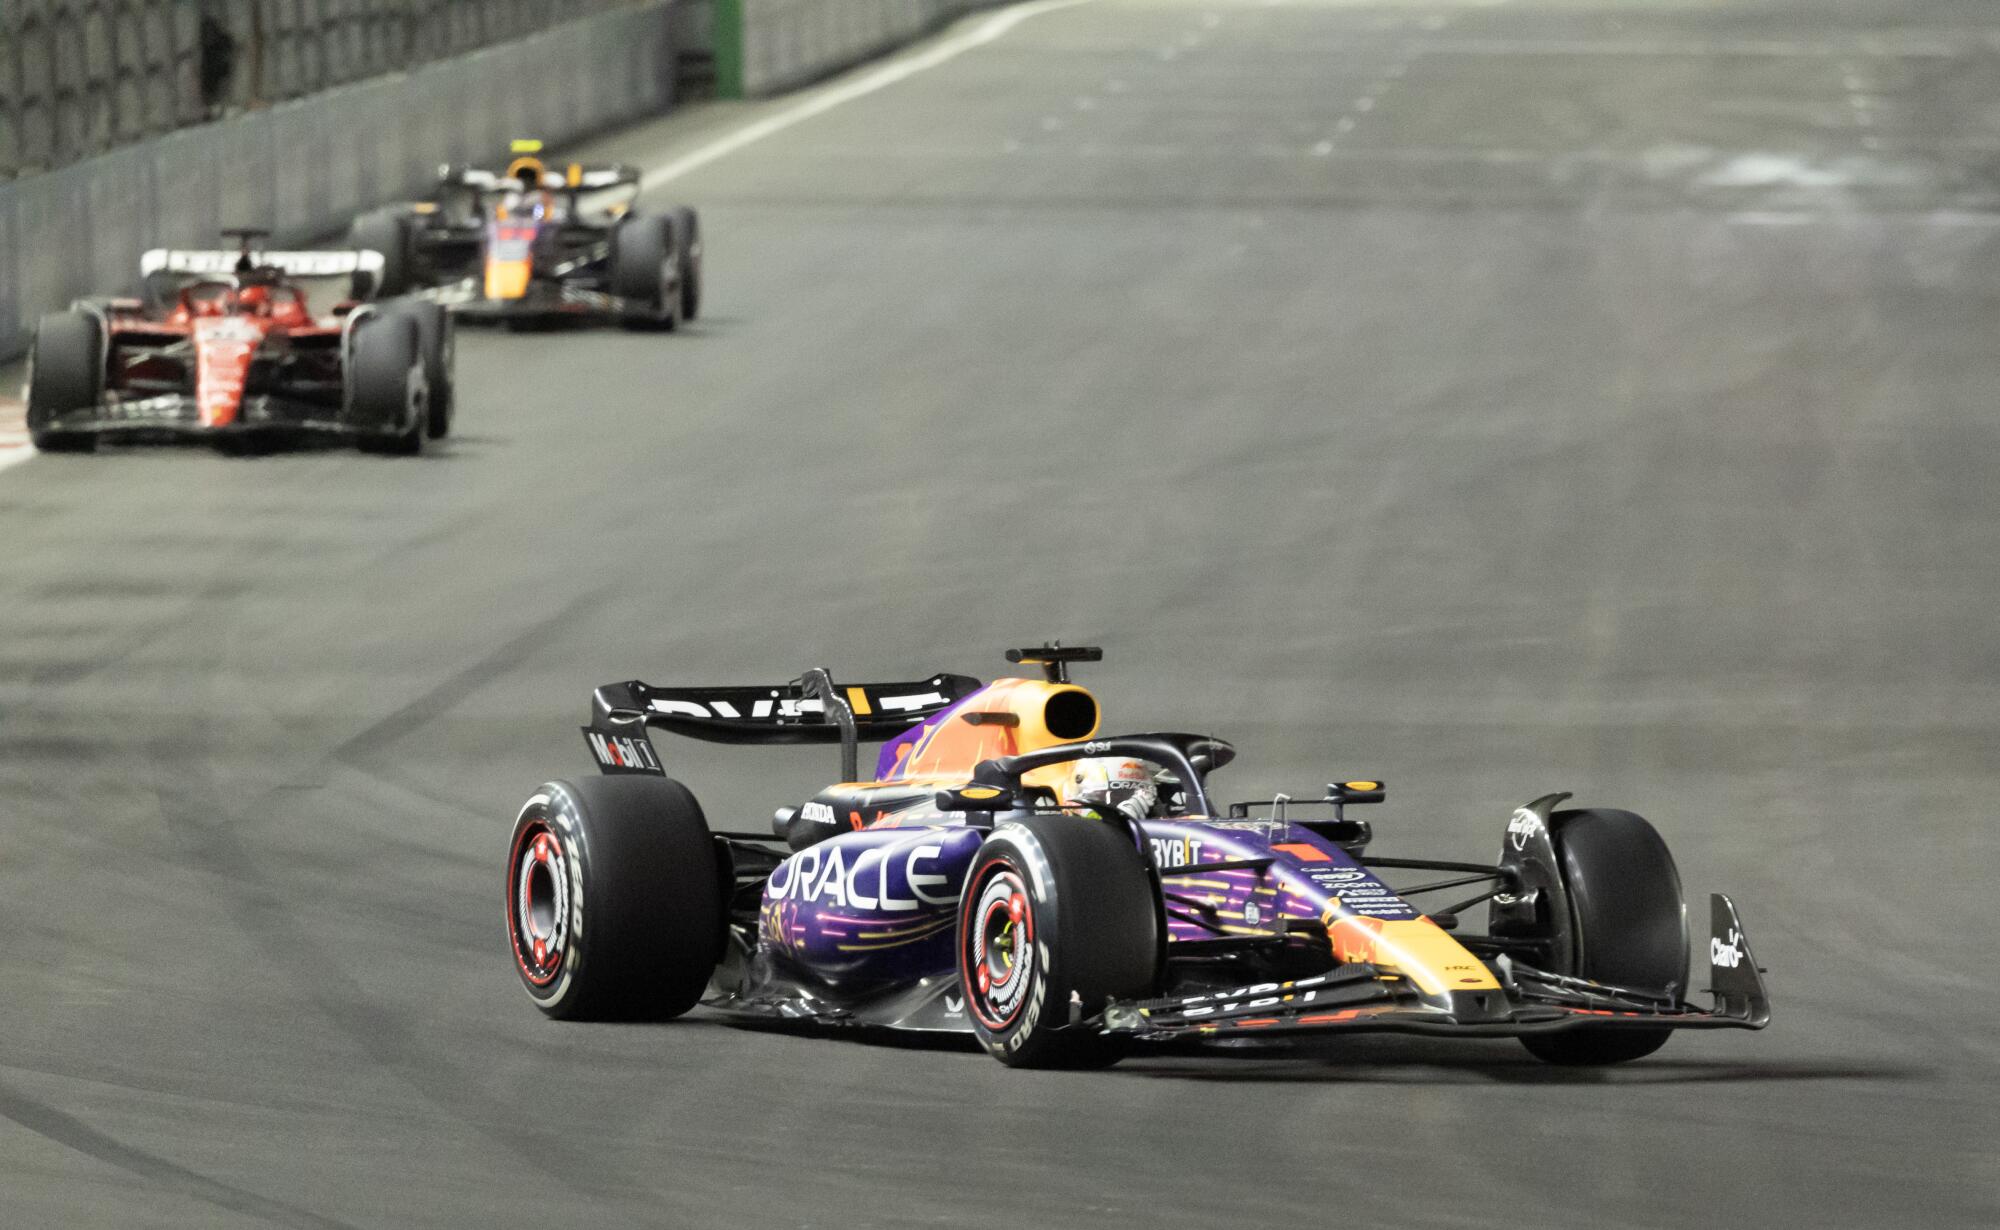 Red Bull's Max Verstappen leads Ferrari's Charles Leclerc and Red Bull's Sergio Perez during the Las Vegas Grand Prix 